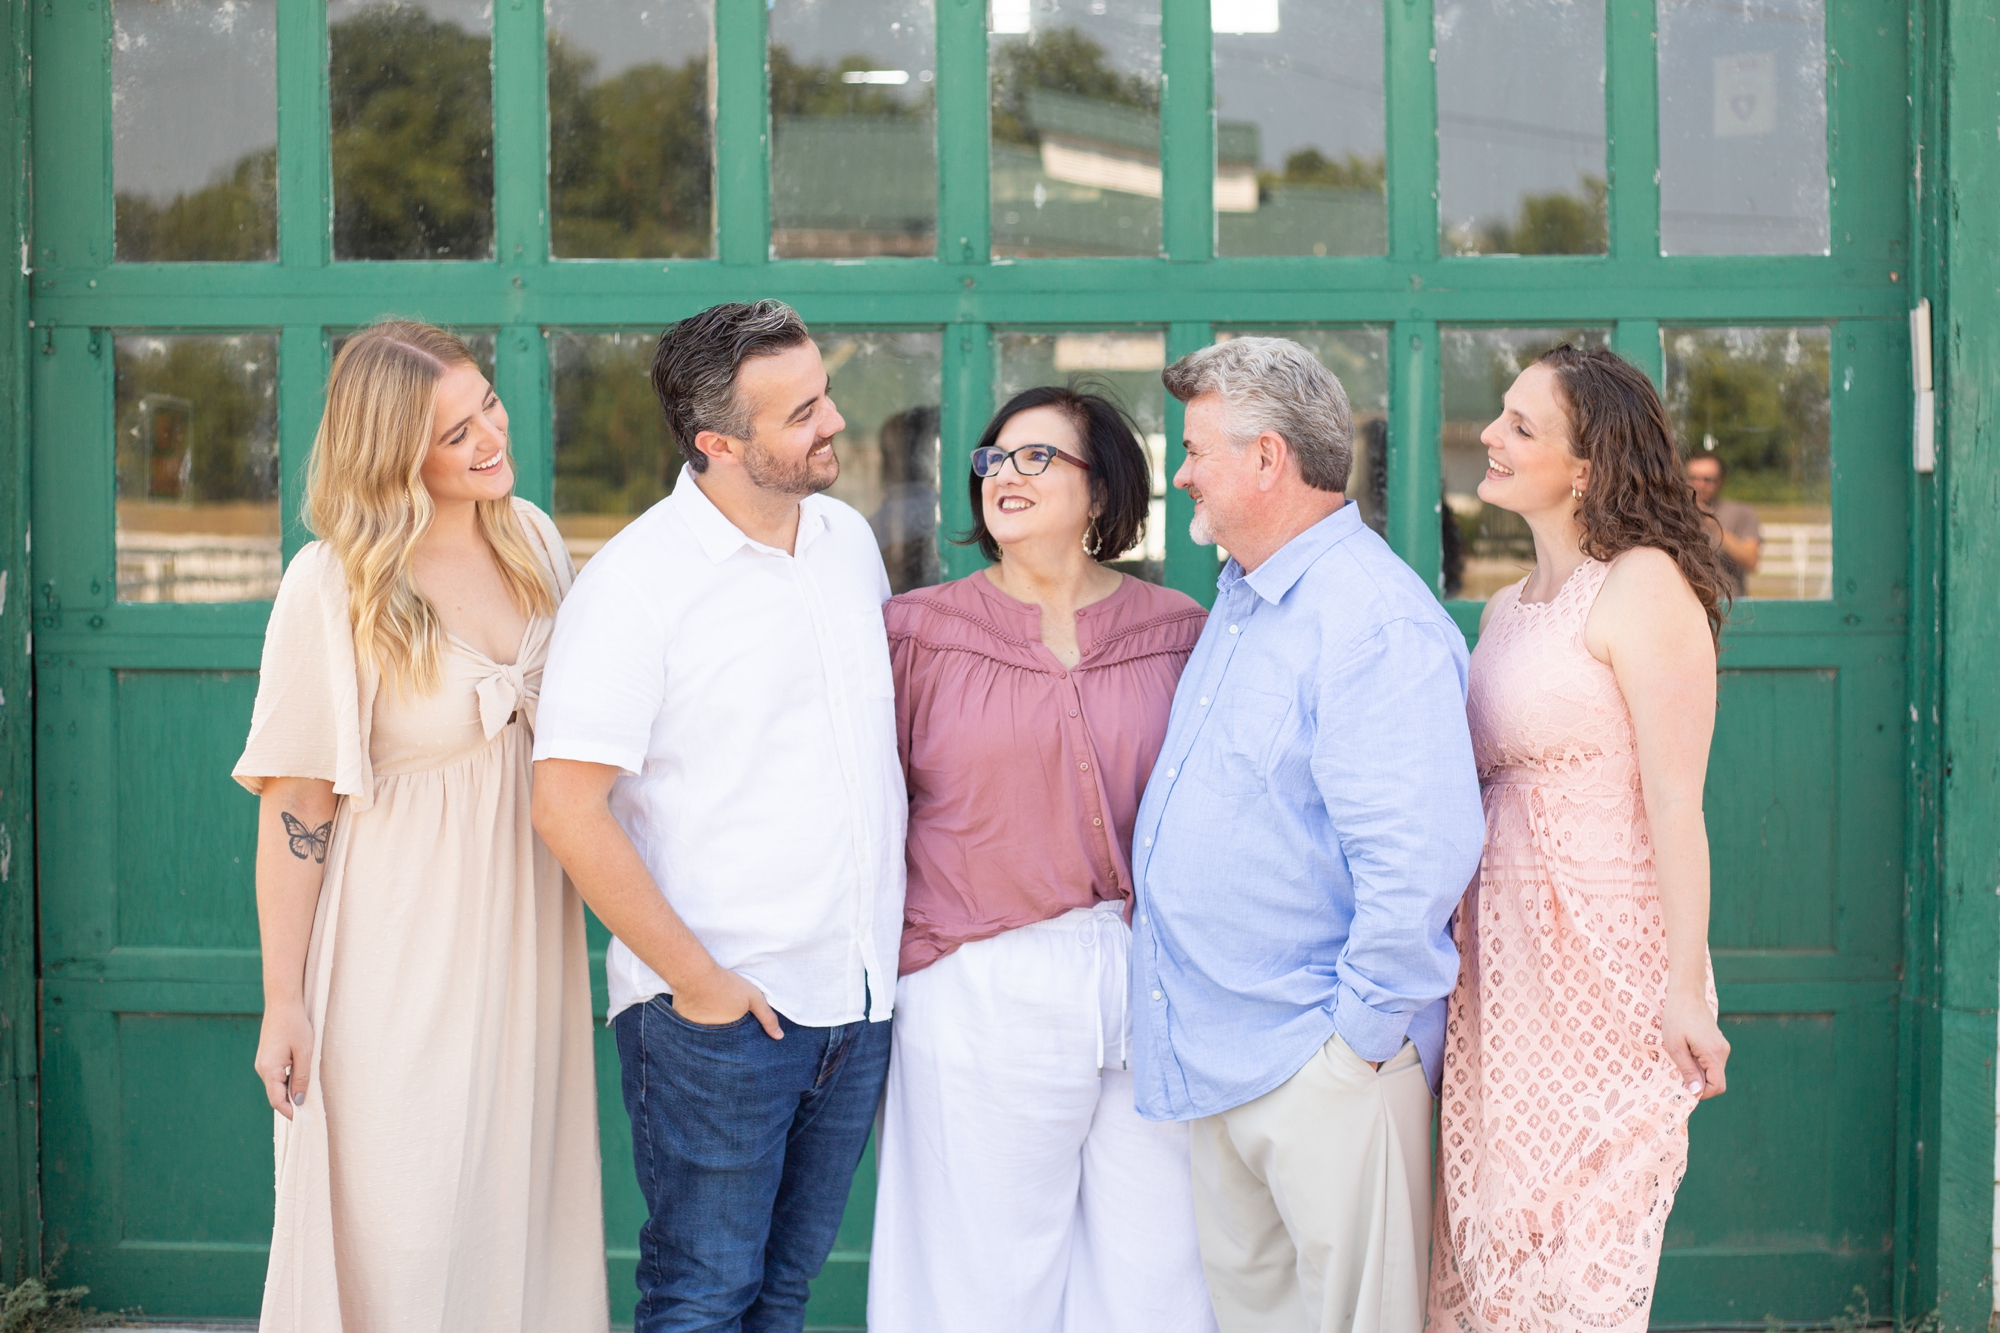 The Bishops' extended family session is live on the blog now! I loved hanging out with this sweet family for a little while and capturing them all together! This session is featured on my monthly membership, Behind the Lens! Go along with me on this session and see how I shoot it from the settings I chose to how I posed them! Click to learn more! 